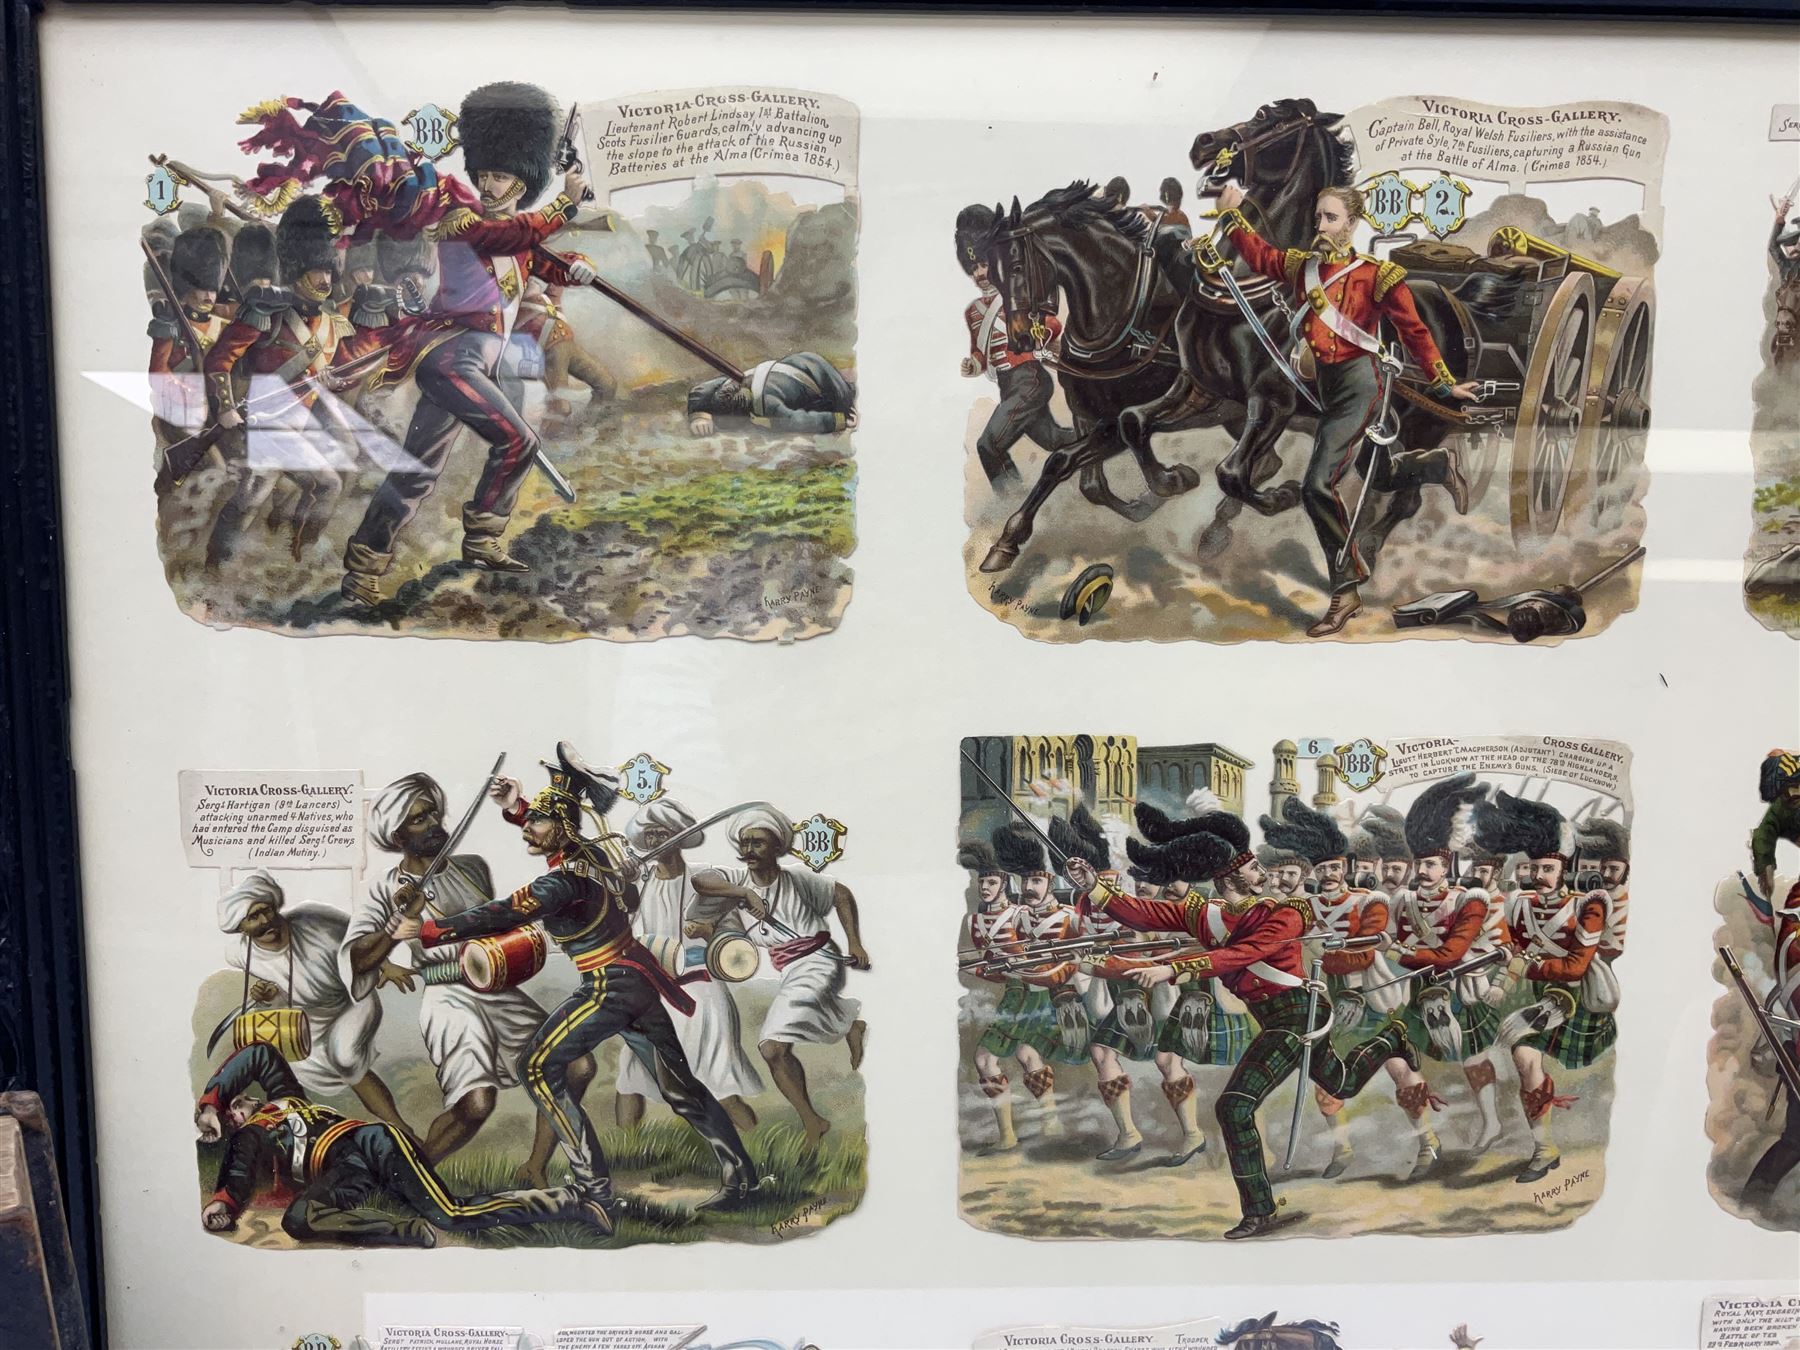 Payne (Harry) Artist: Victoria Cross Gallery; Complete set of twelve chromolithographic relief print - Image 2 of 13